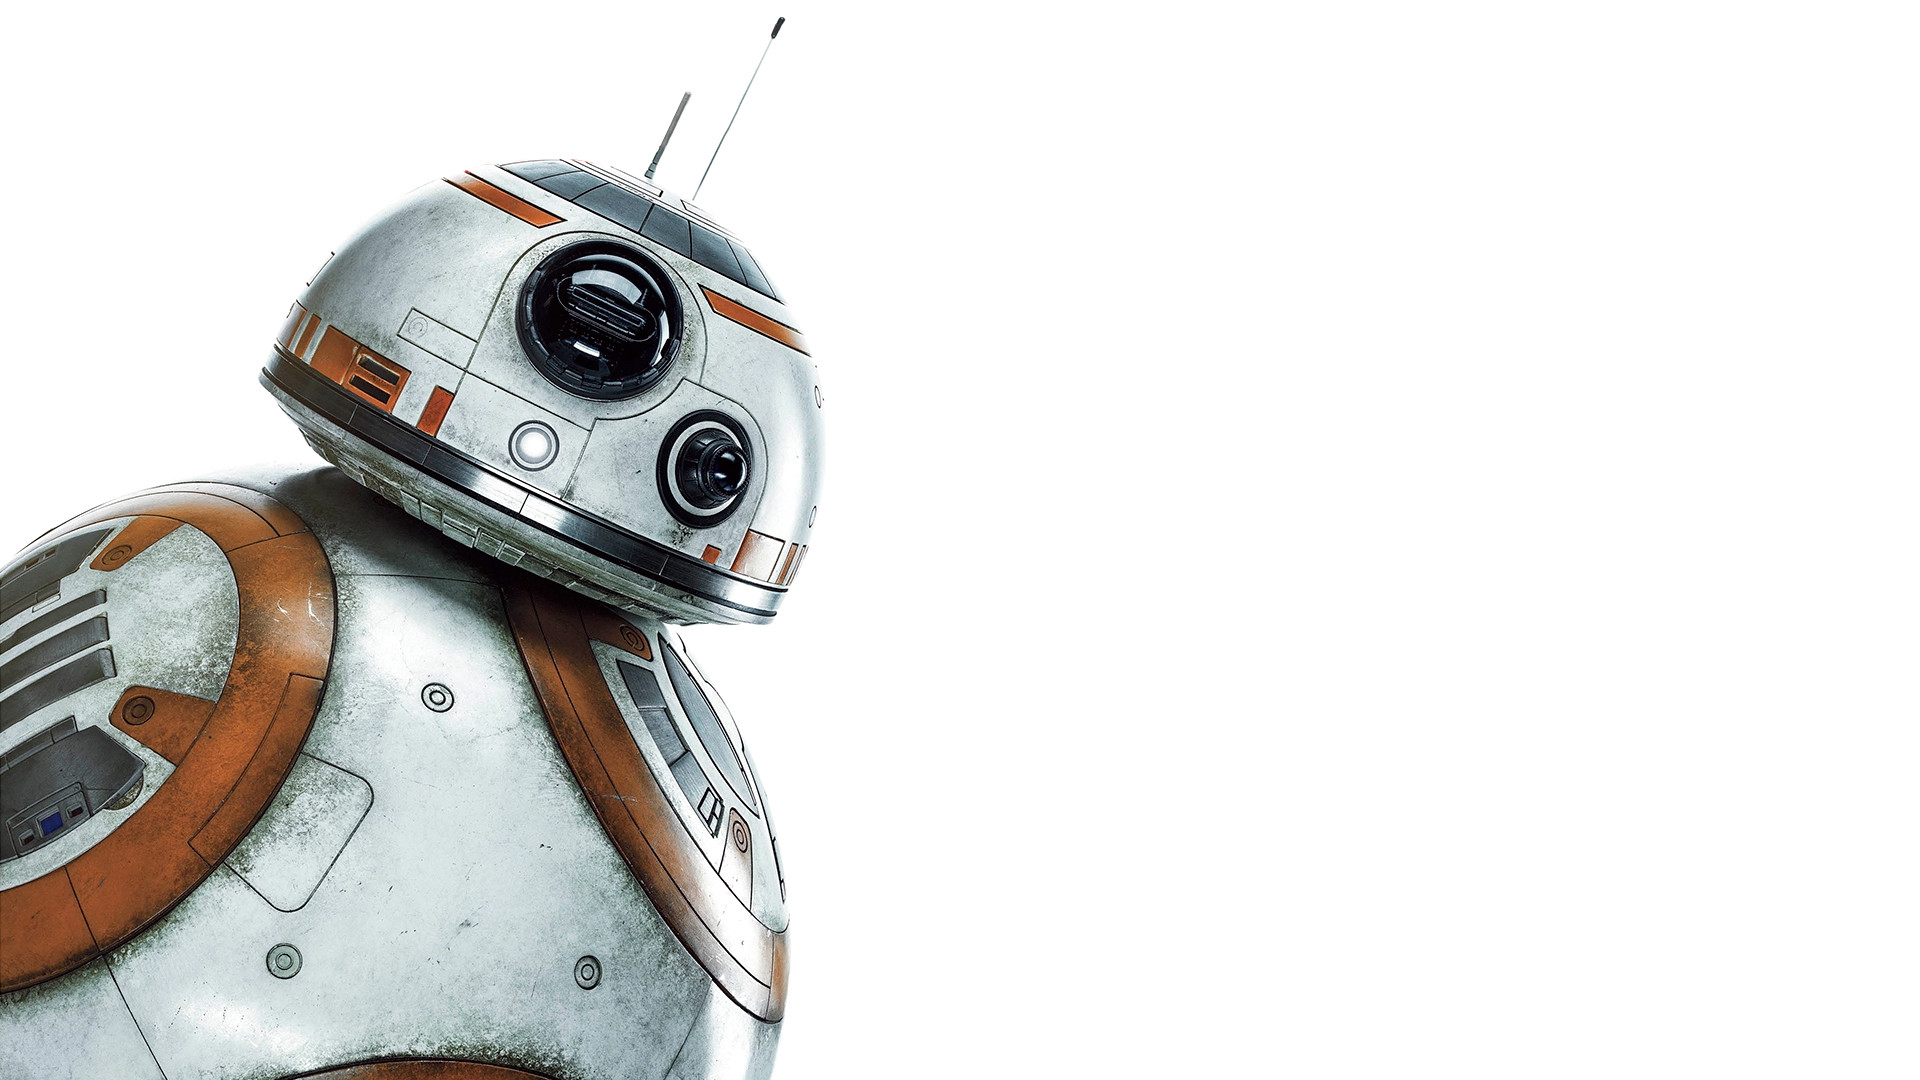 BB-8 Unit images wp8 HD wallpaper and background photos